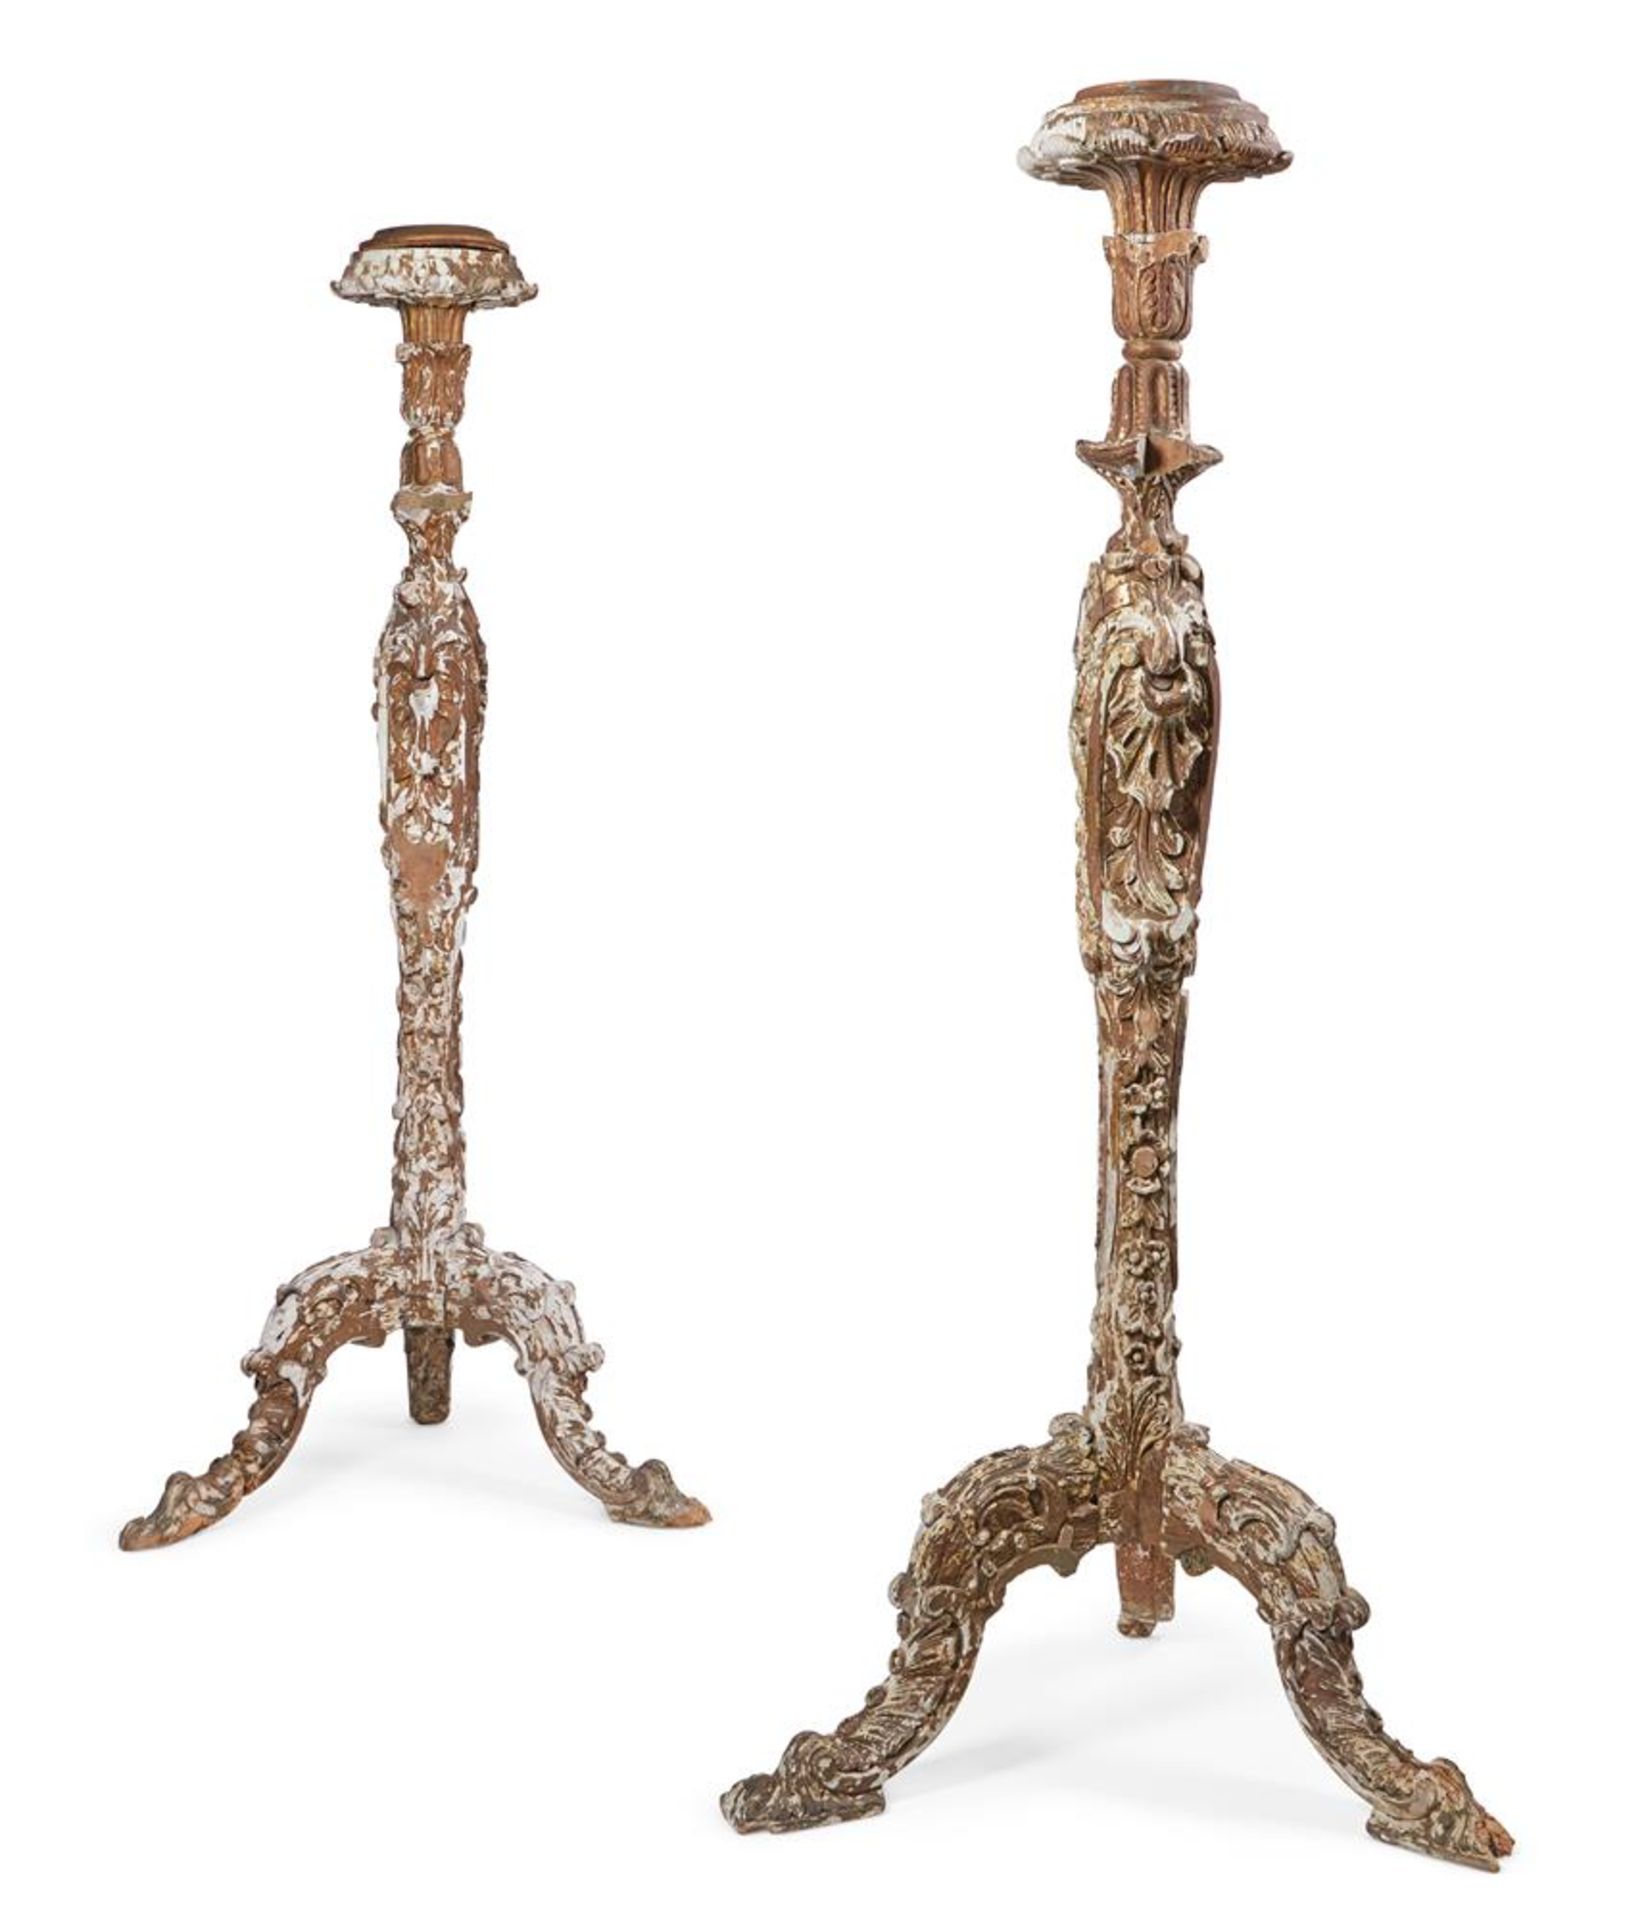 A PAIR OF CARVED POPLAR GILTWOOD TORCHERES, ITALIAN OR GERMAN, MID 18TH CENTURY - Image 3 of 3